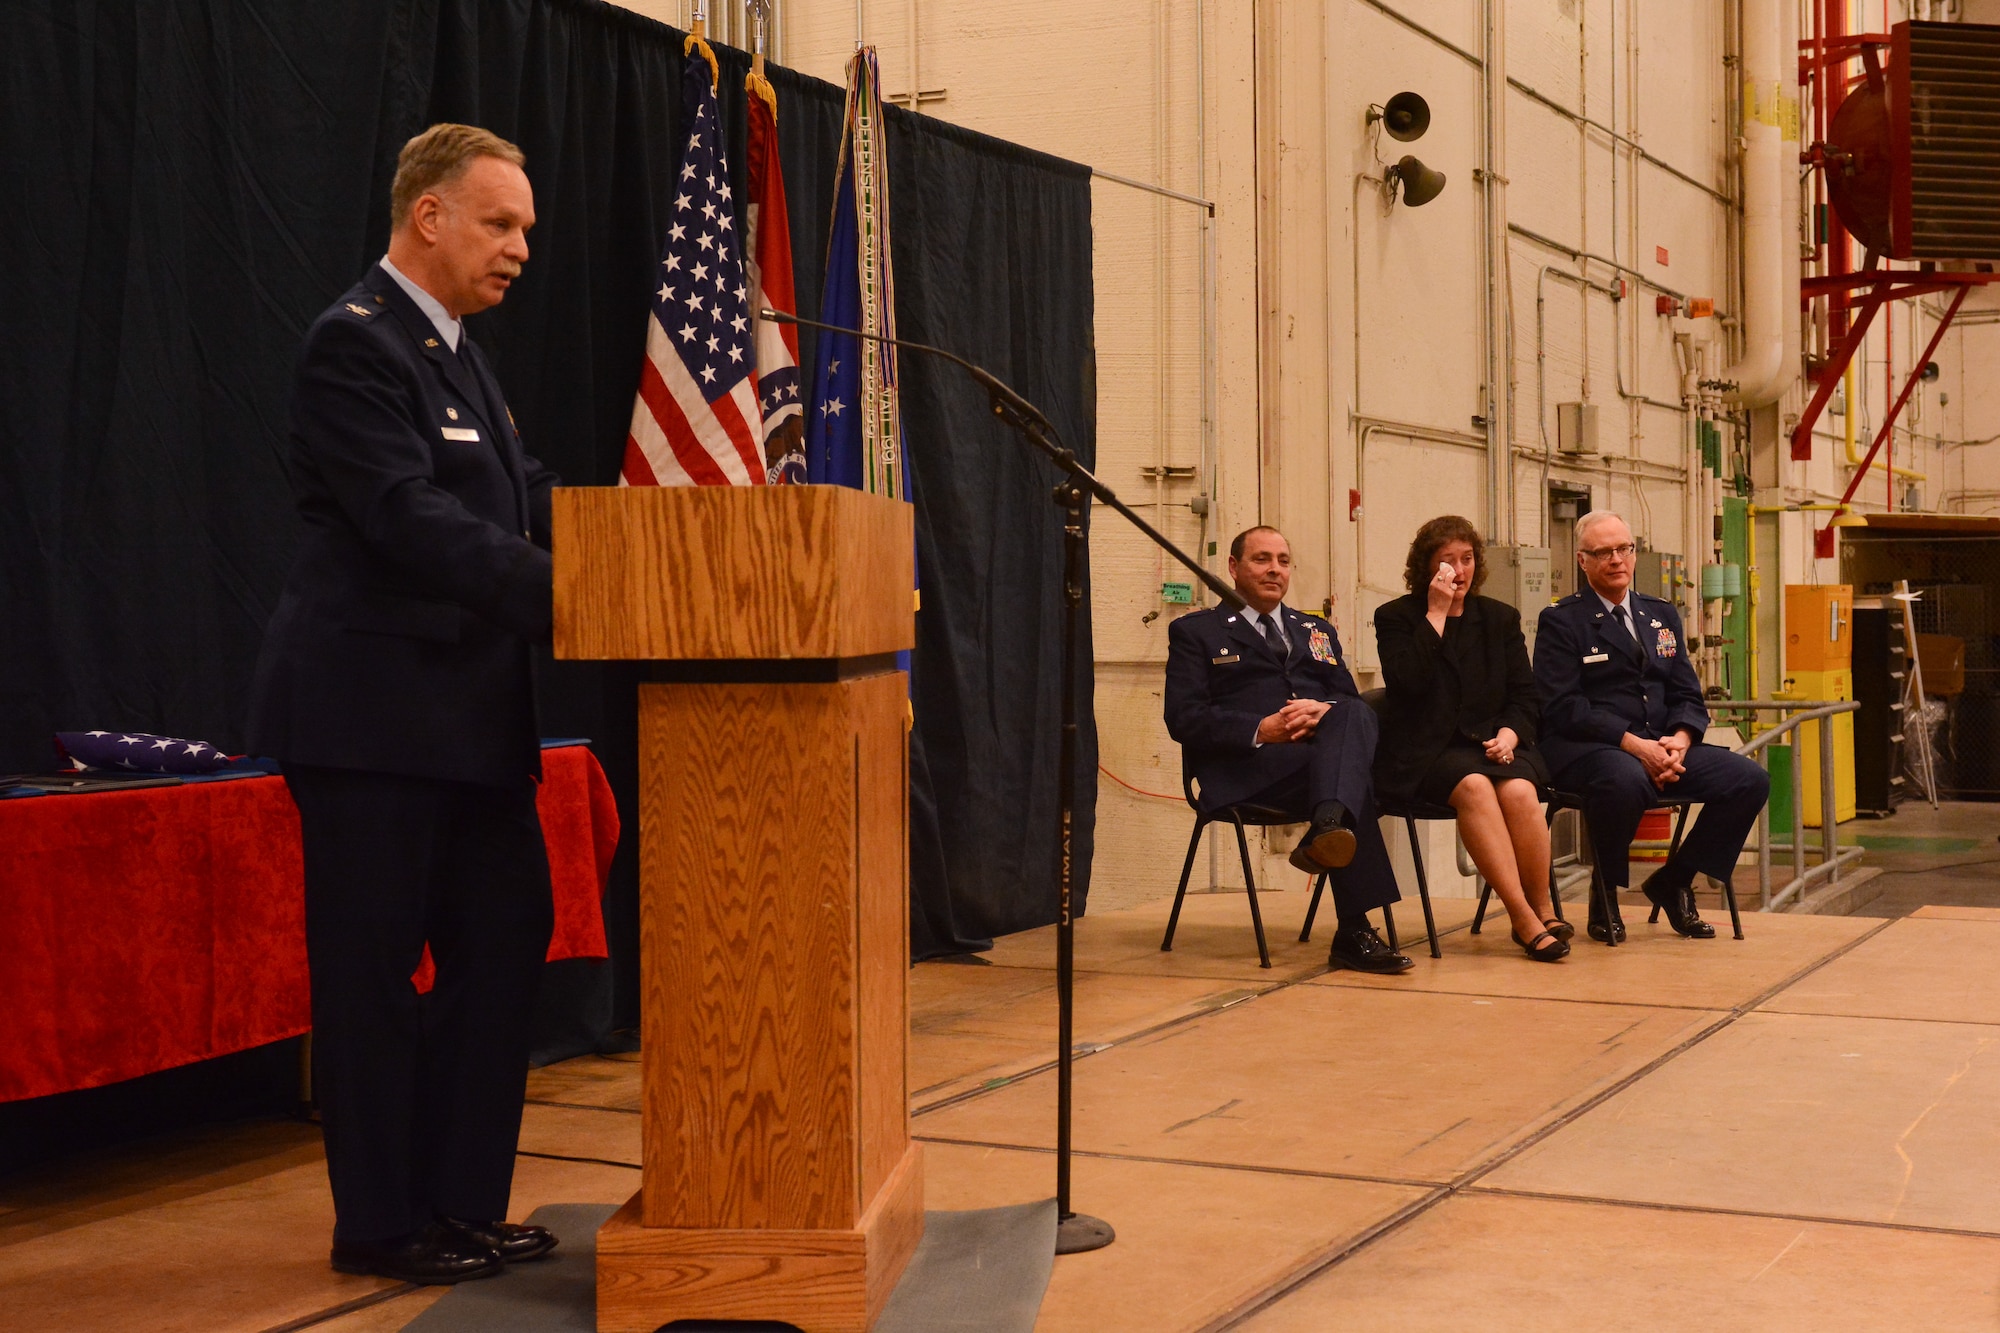 U.S. Air Force Col. David Halter, vice commander of the 139th Airlfit Wing retires at Rosecrans Air National Guard Base, St. Joseph, Mo., March 7, 2015. Halter retired after 30 years of military service and 6,100 flight hours as a navigator.  (U.S. Air National Guard photo by: Senior Airman Patrick P. Evenson/Released)